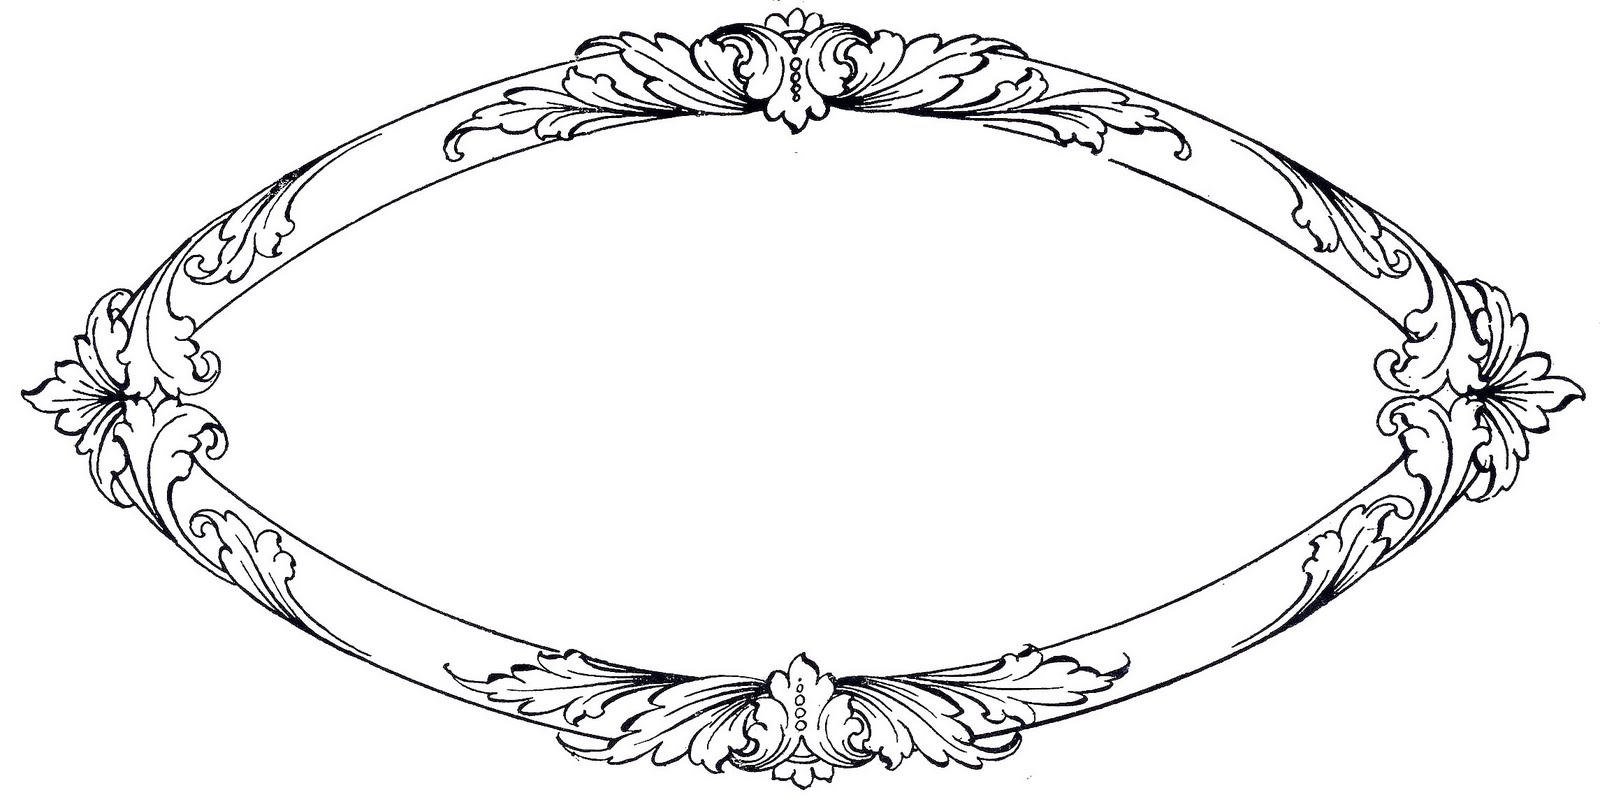 Vintage Clip Art   Ornate Oval Frame With Scrolls   The Graphics Fairy